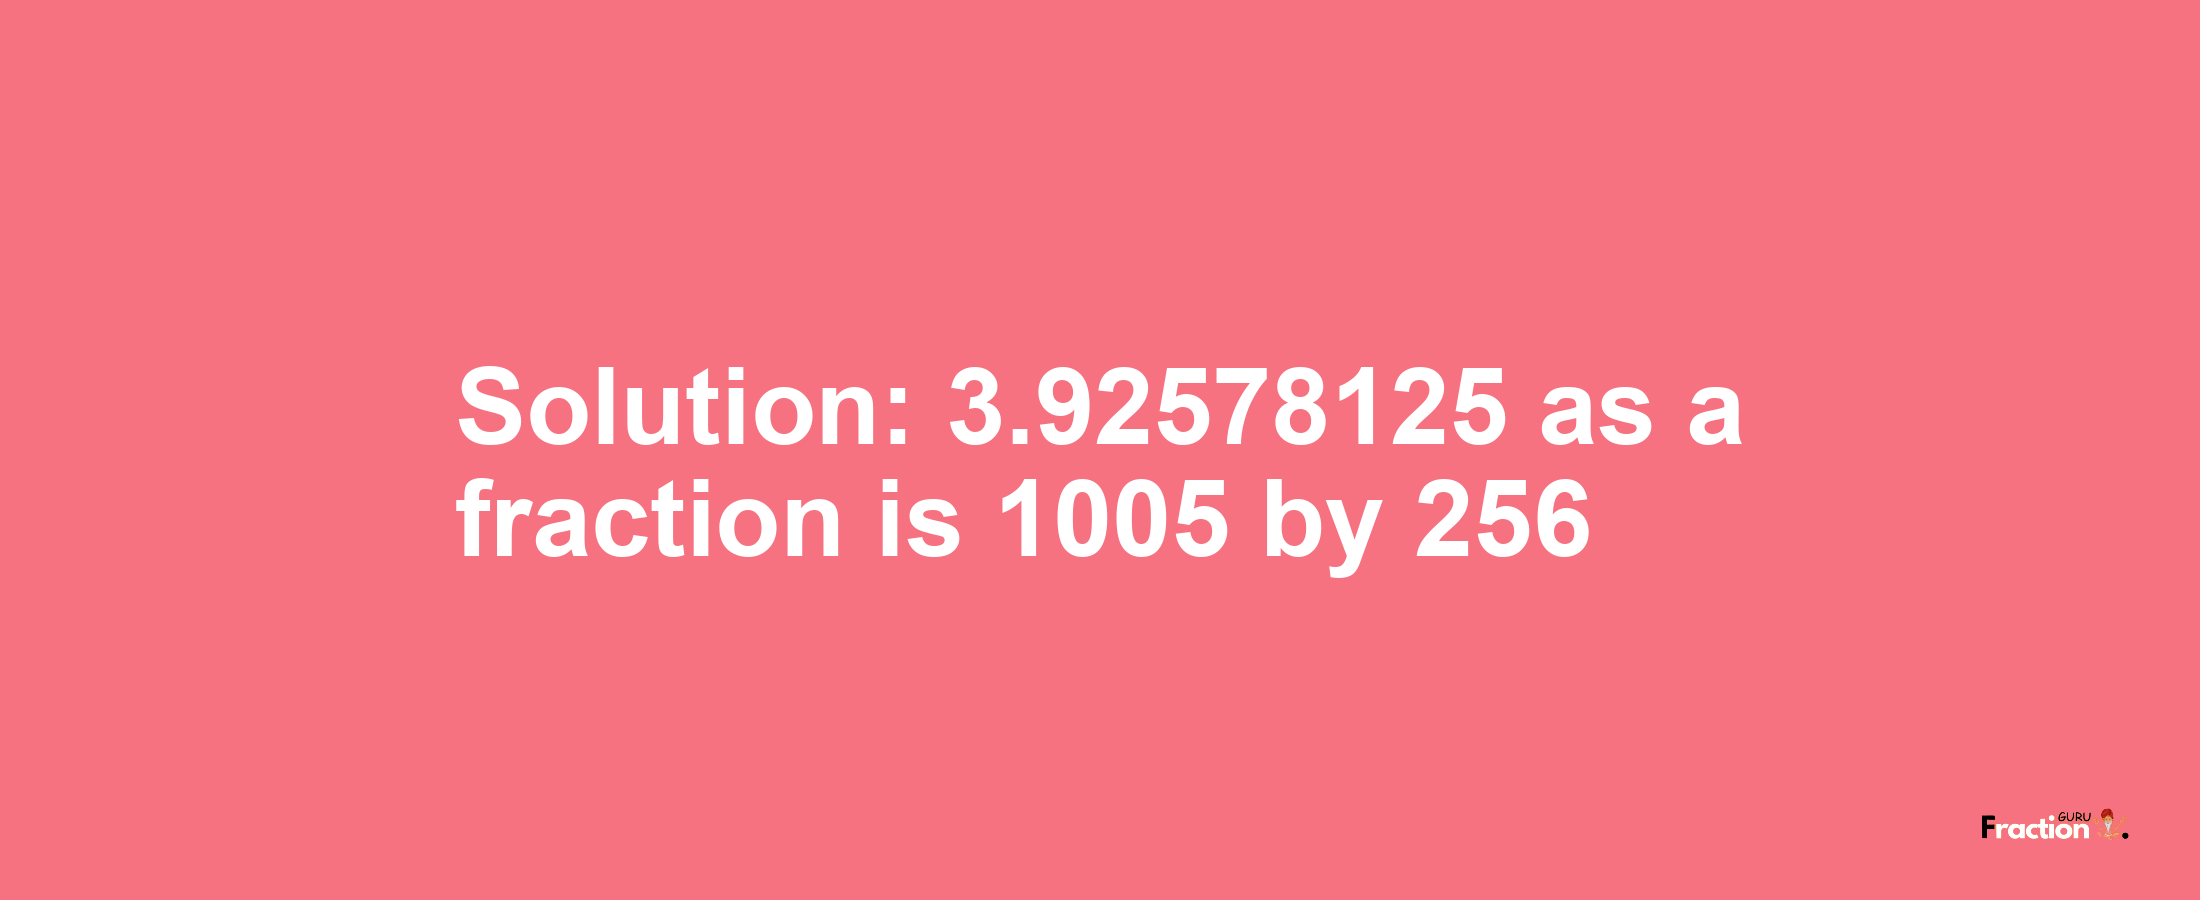 Solution:3.92578125 as a fraction is 1005/256